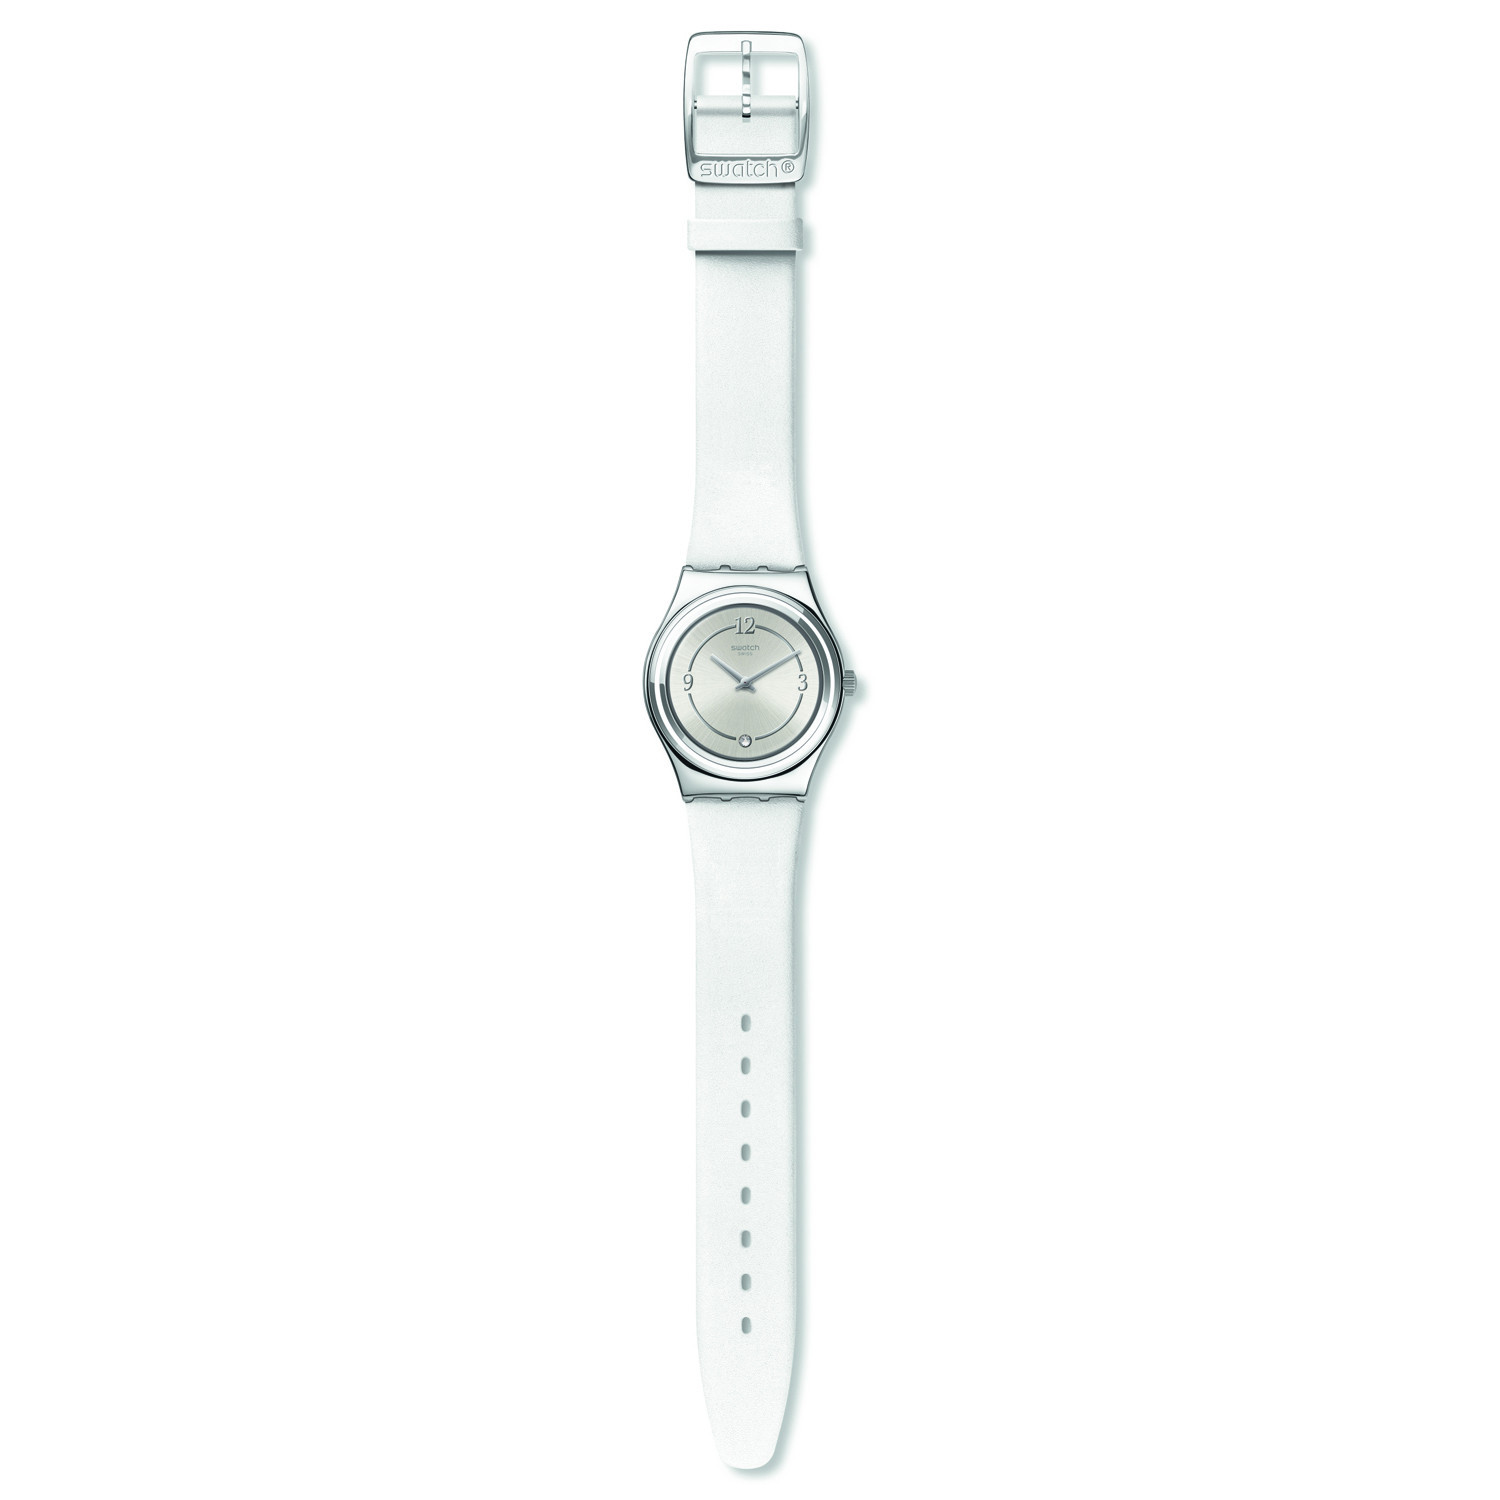 Montre femme Swatch Madame Blanchette
collection Core Refresh